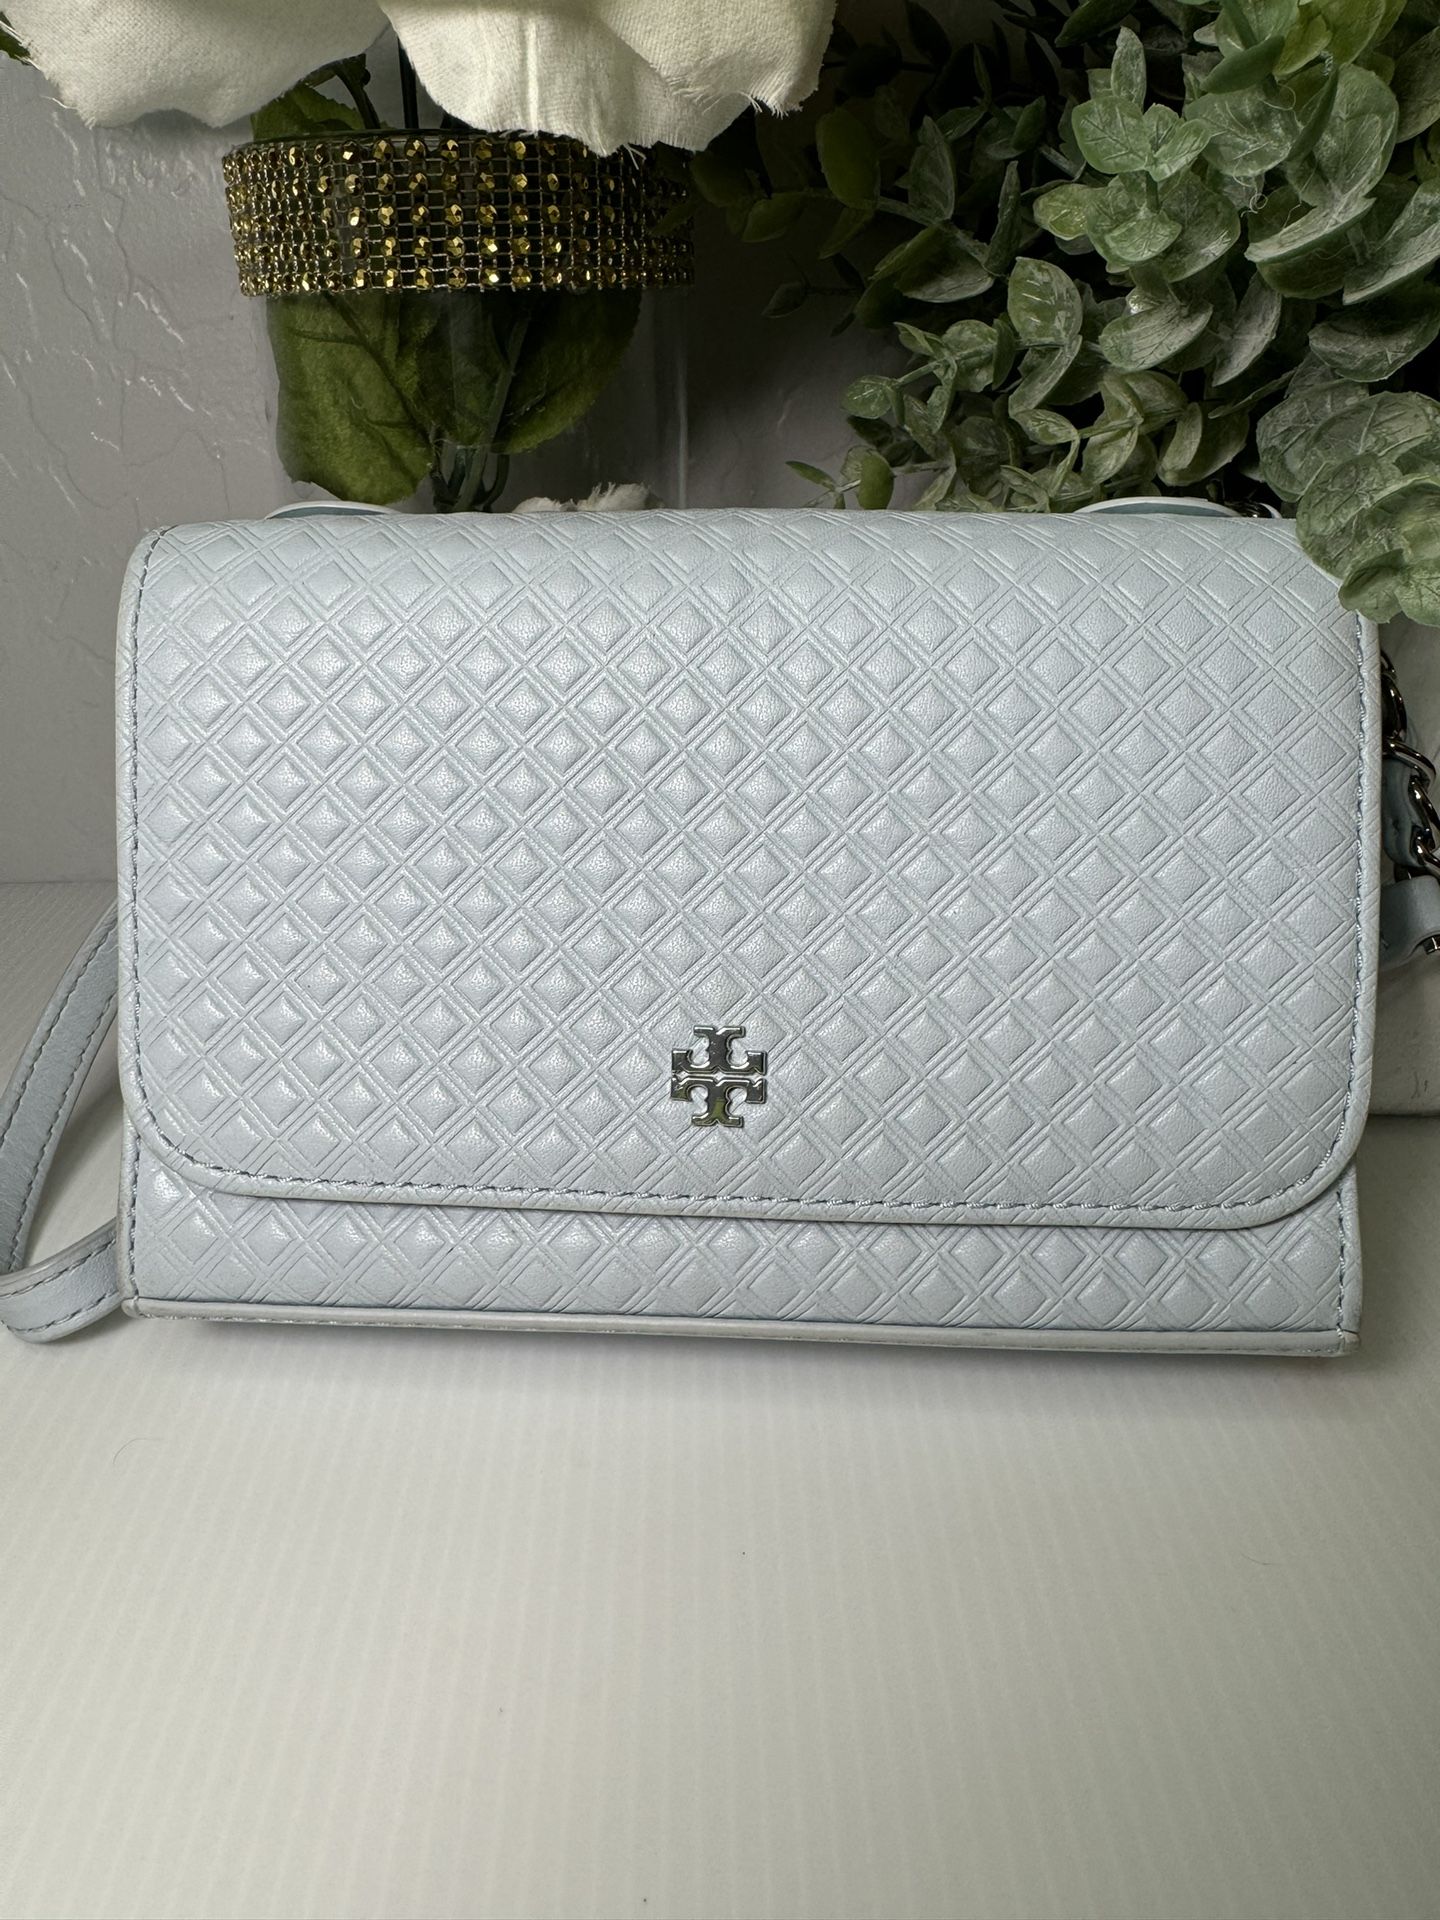 Tory Burch Beautiful Light Blue Crossbody Bag with Silver-Toned Hardware